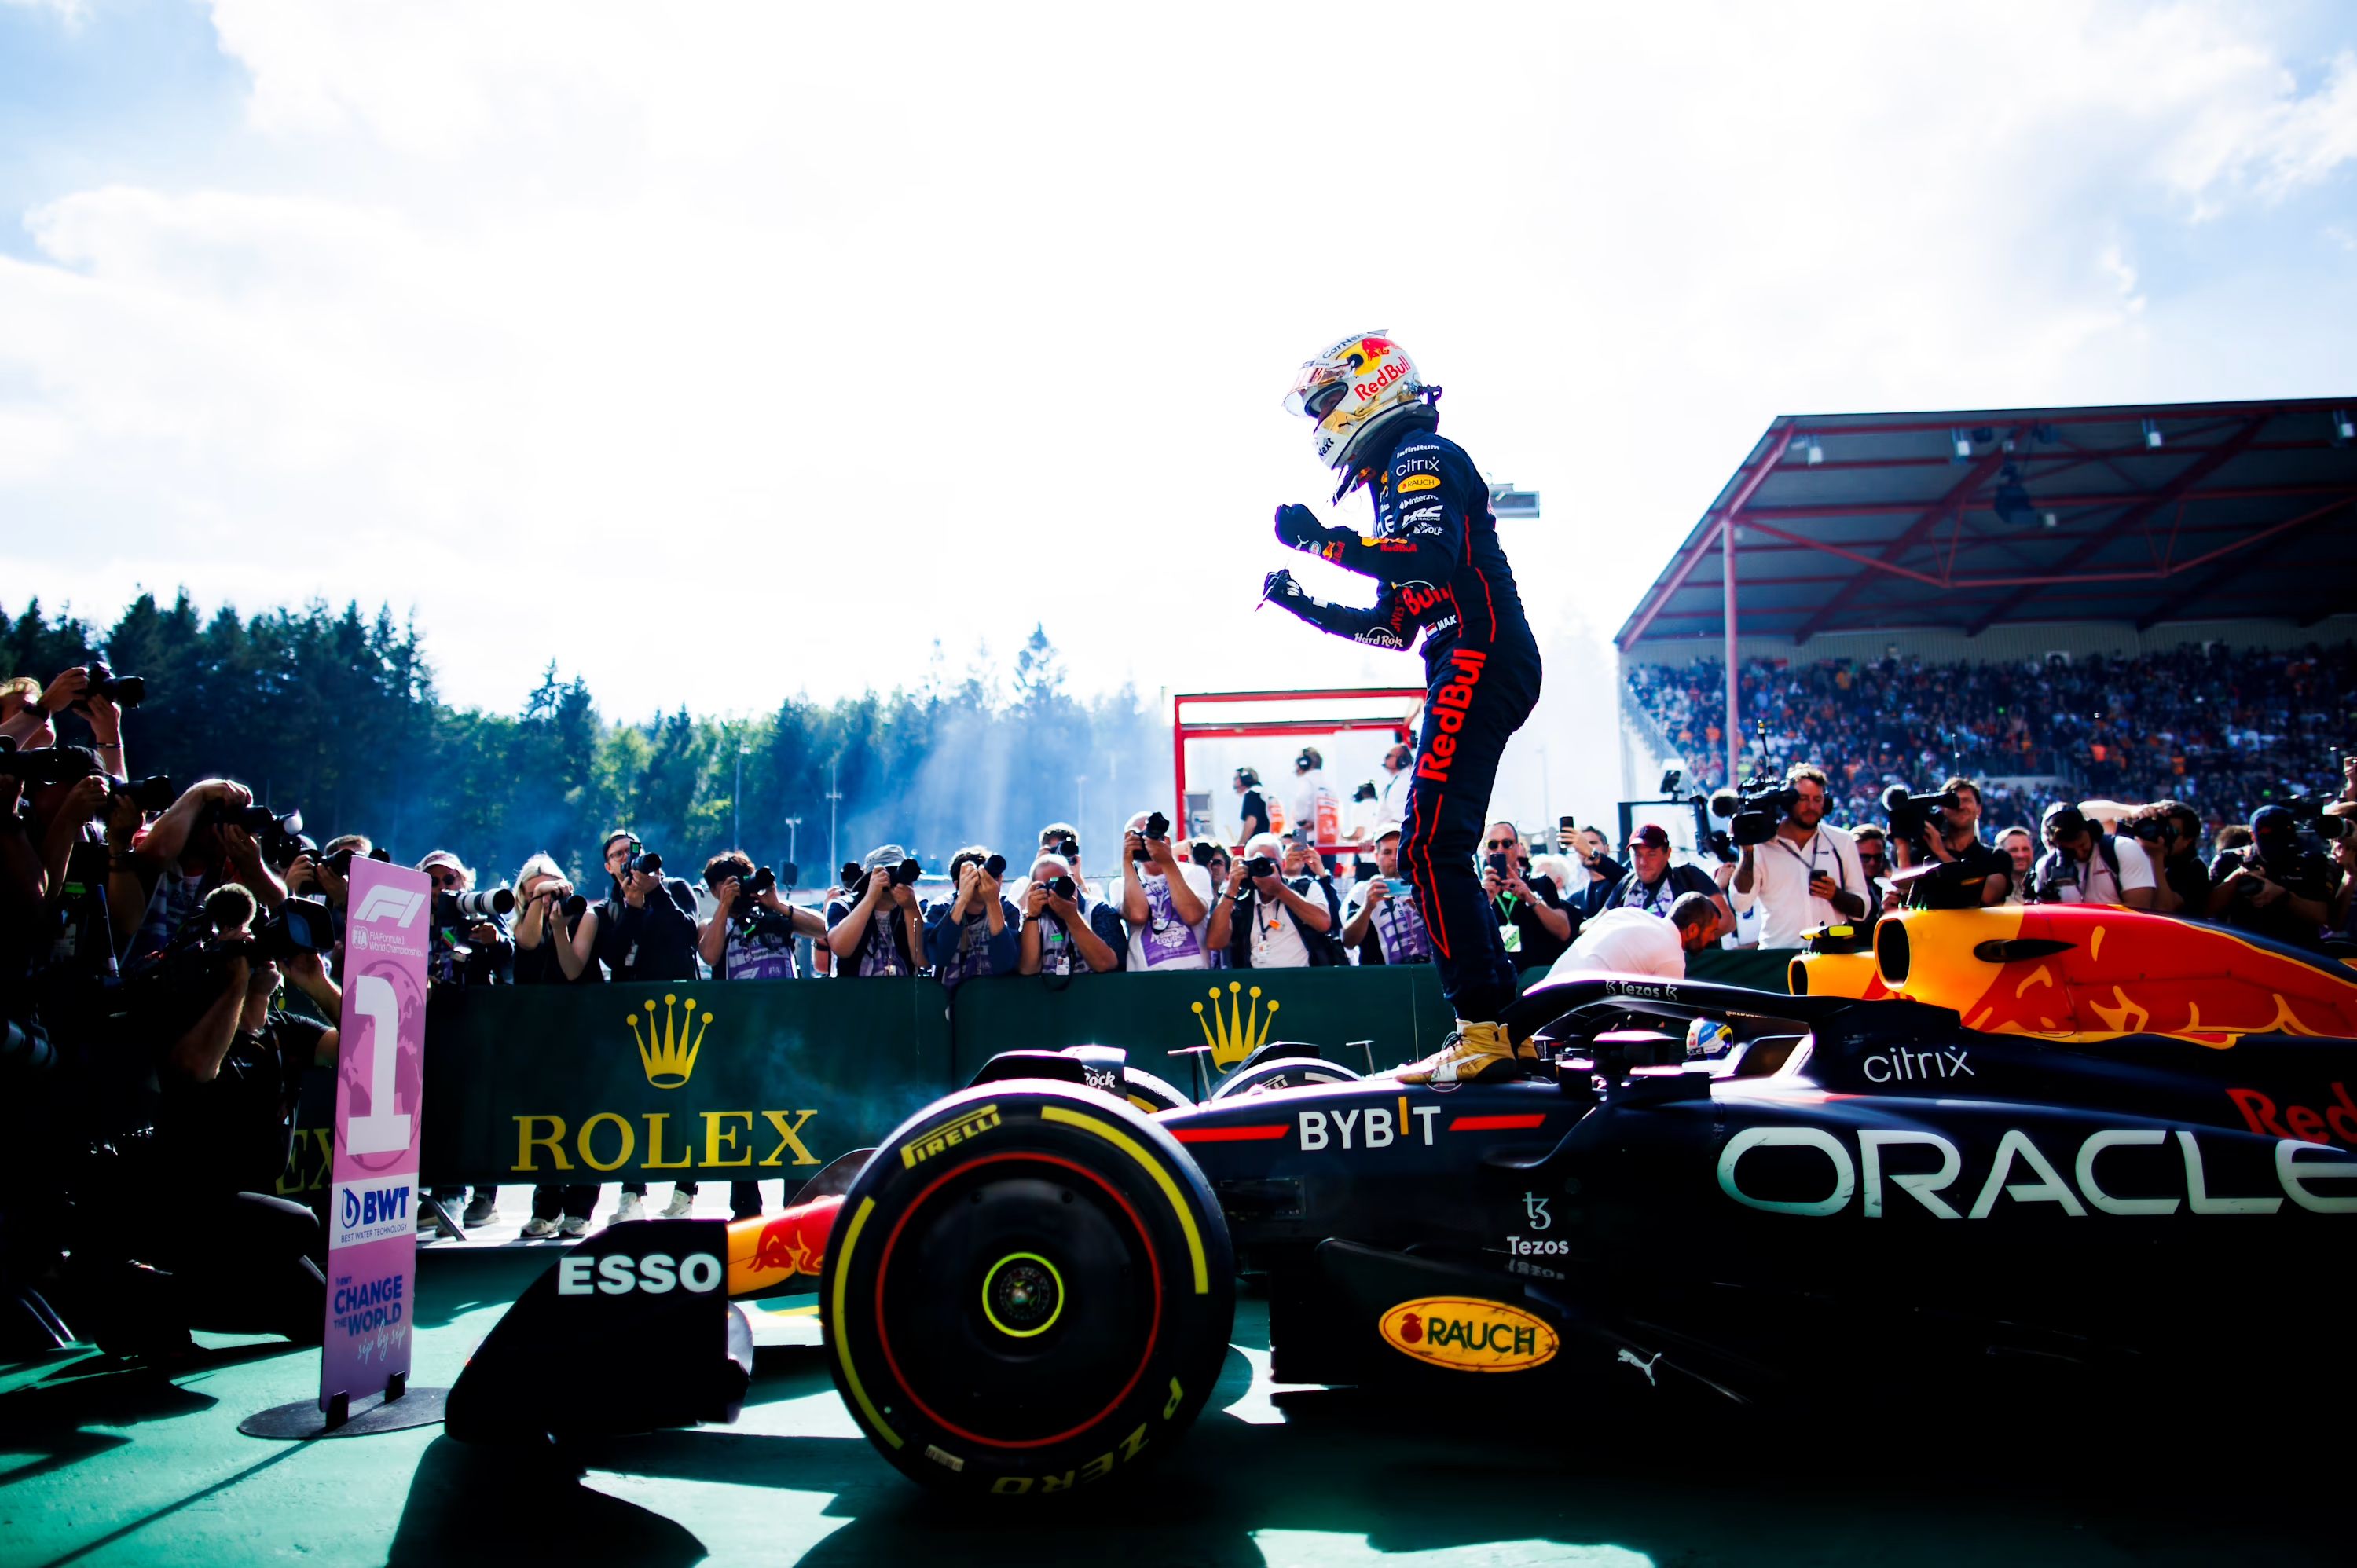 5 Of Red Bull’s Greatest Formula 1 Victories Ranked